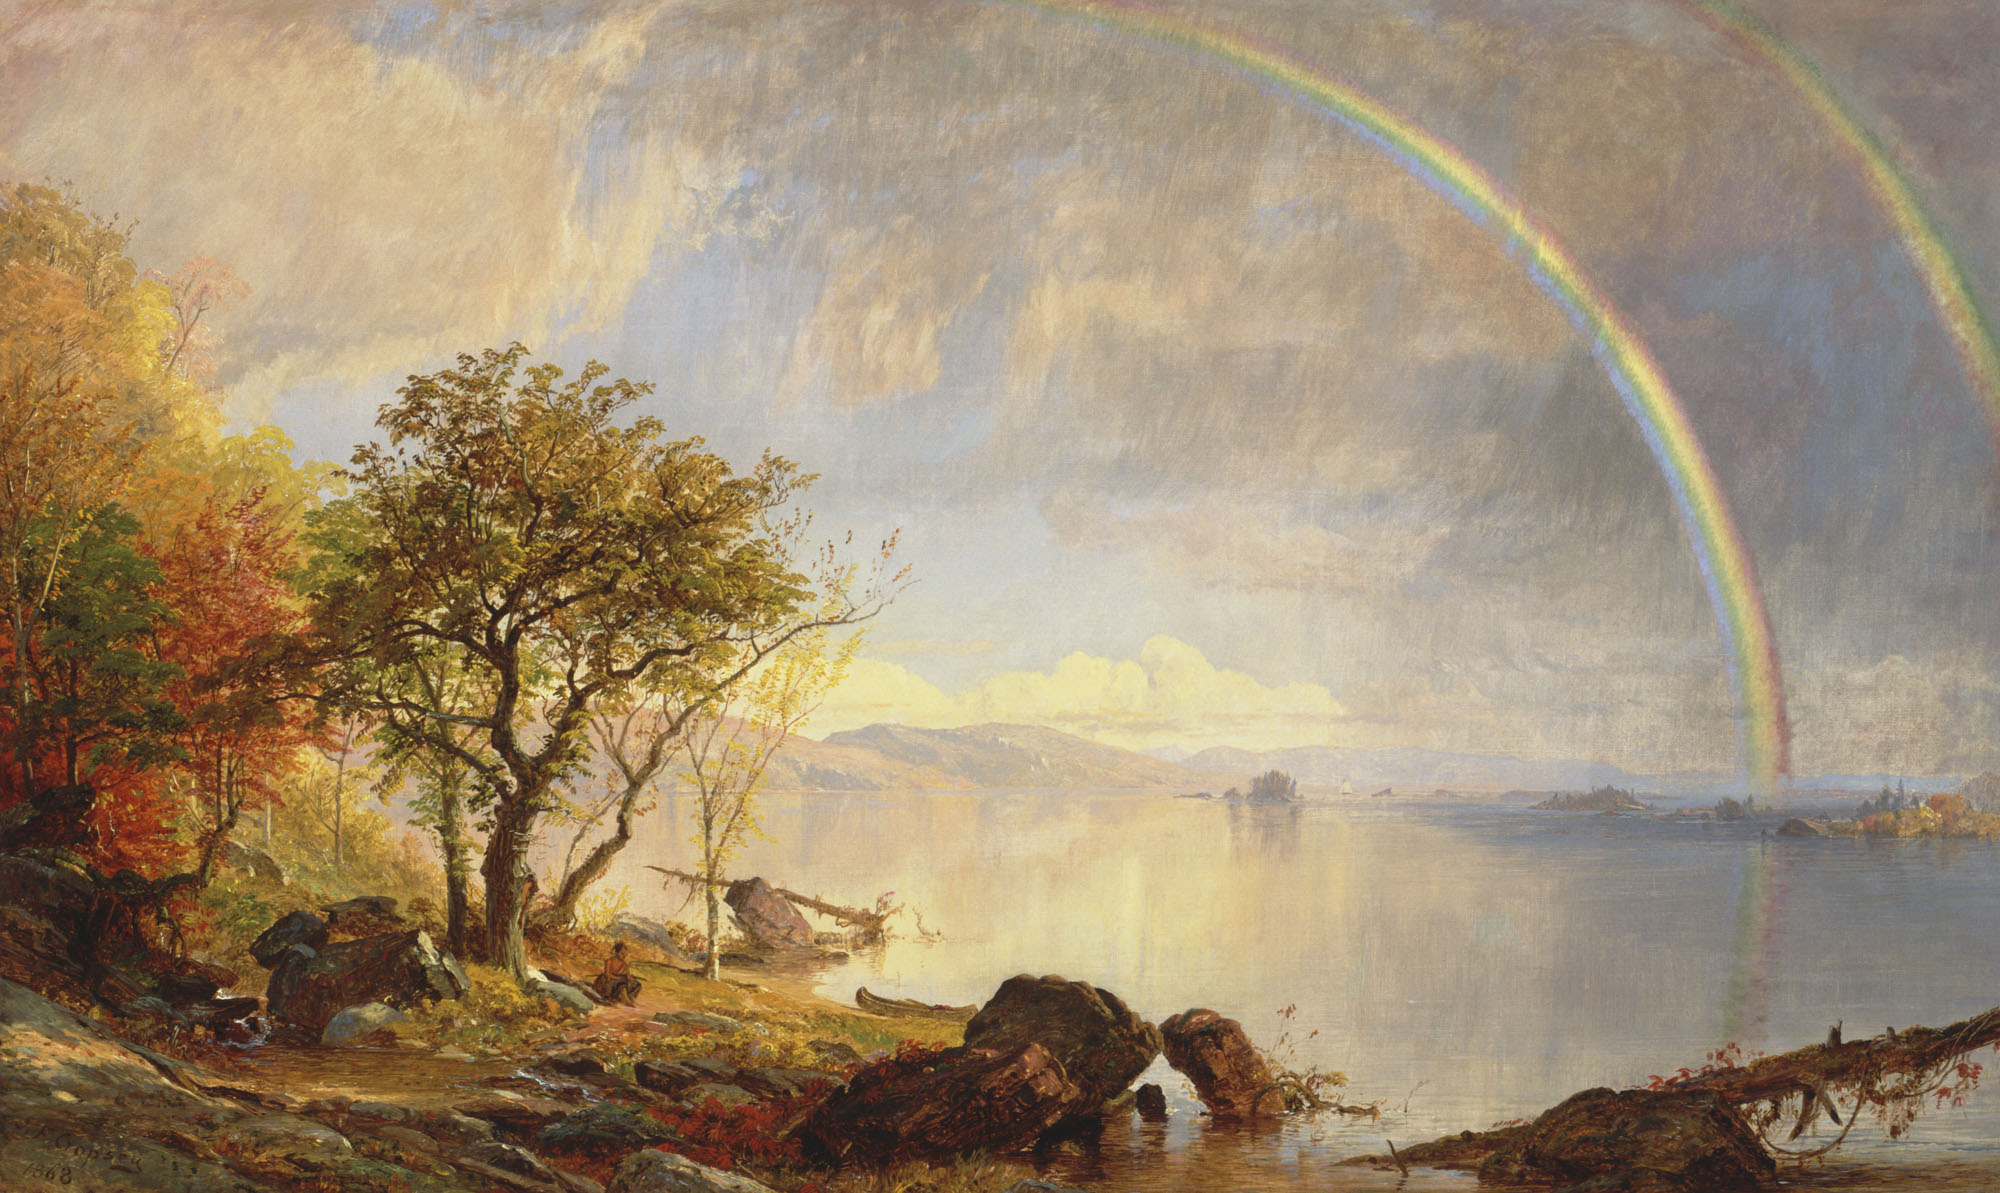 Landscape and Transcendence - Albany Institute of History and Art